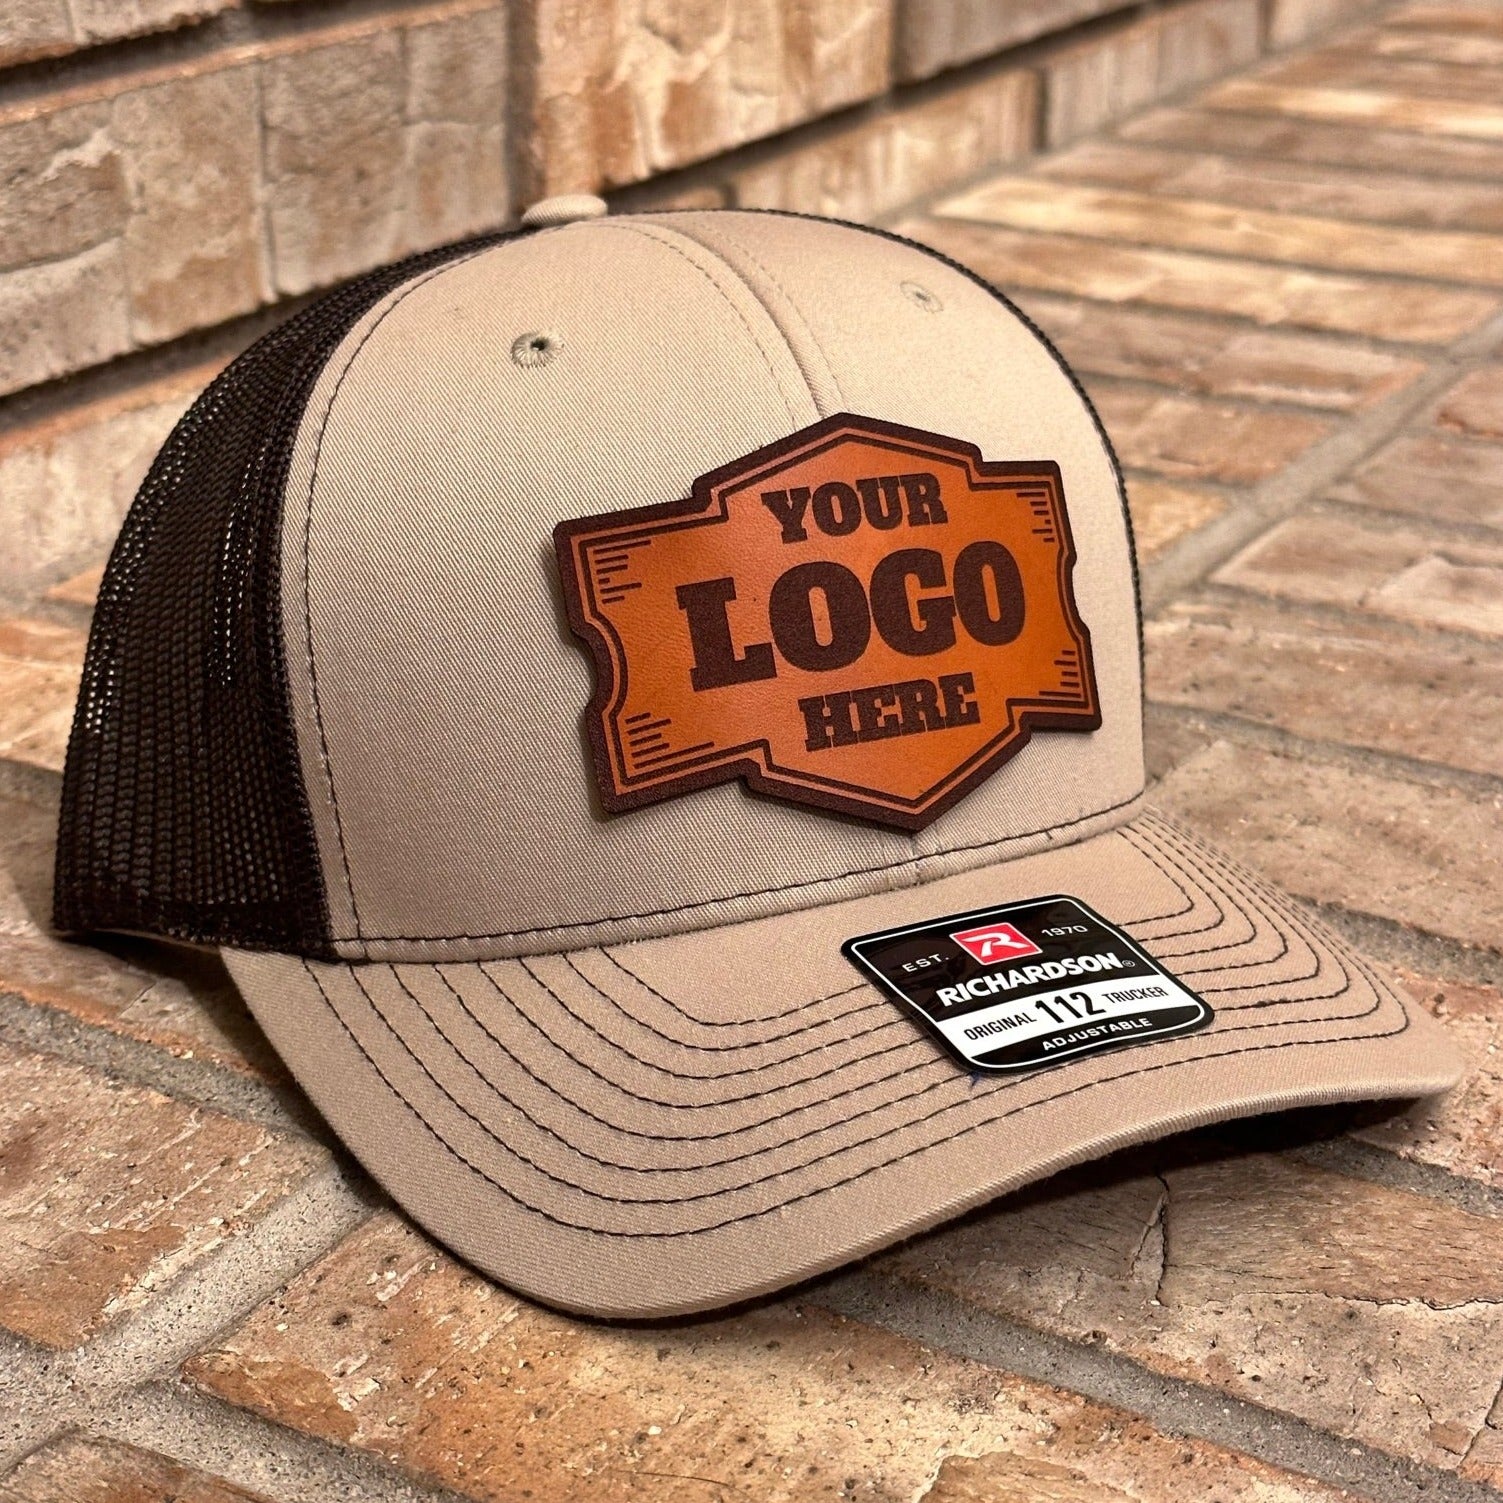 Full Grain Leather Patch Optional Hook and Loop for Your Custom Logo Use  for Bags Hats Shirts Beanies and More. 